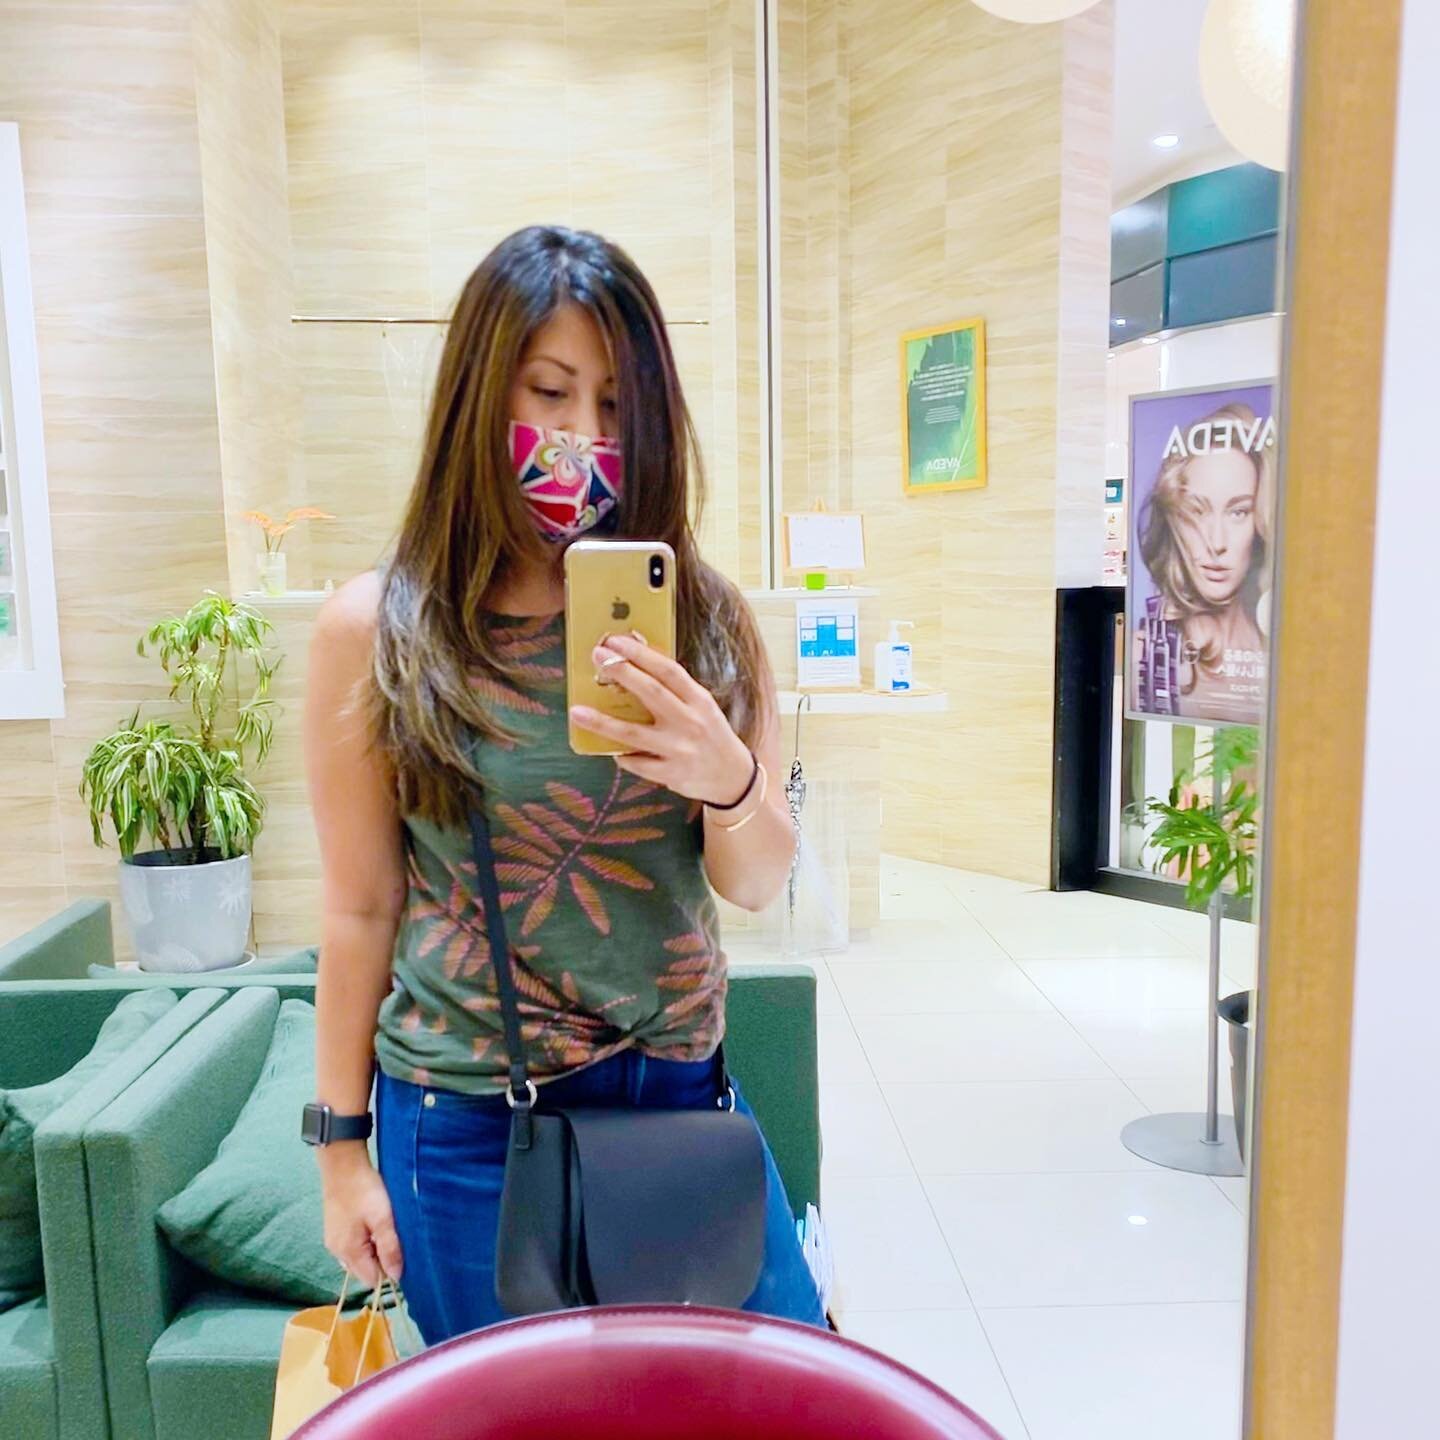 What do you do when you randomly have a free afternoon? #momlife 

I normally wouldn&rsquo;t say to walk into a salon on a whim for a haircut, but didn&rsquo;t want to waste the free time I had, sooo&hellip;. I did it. 🤣

Last time I got a haircut a